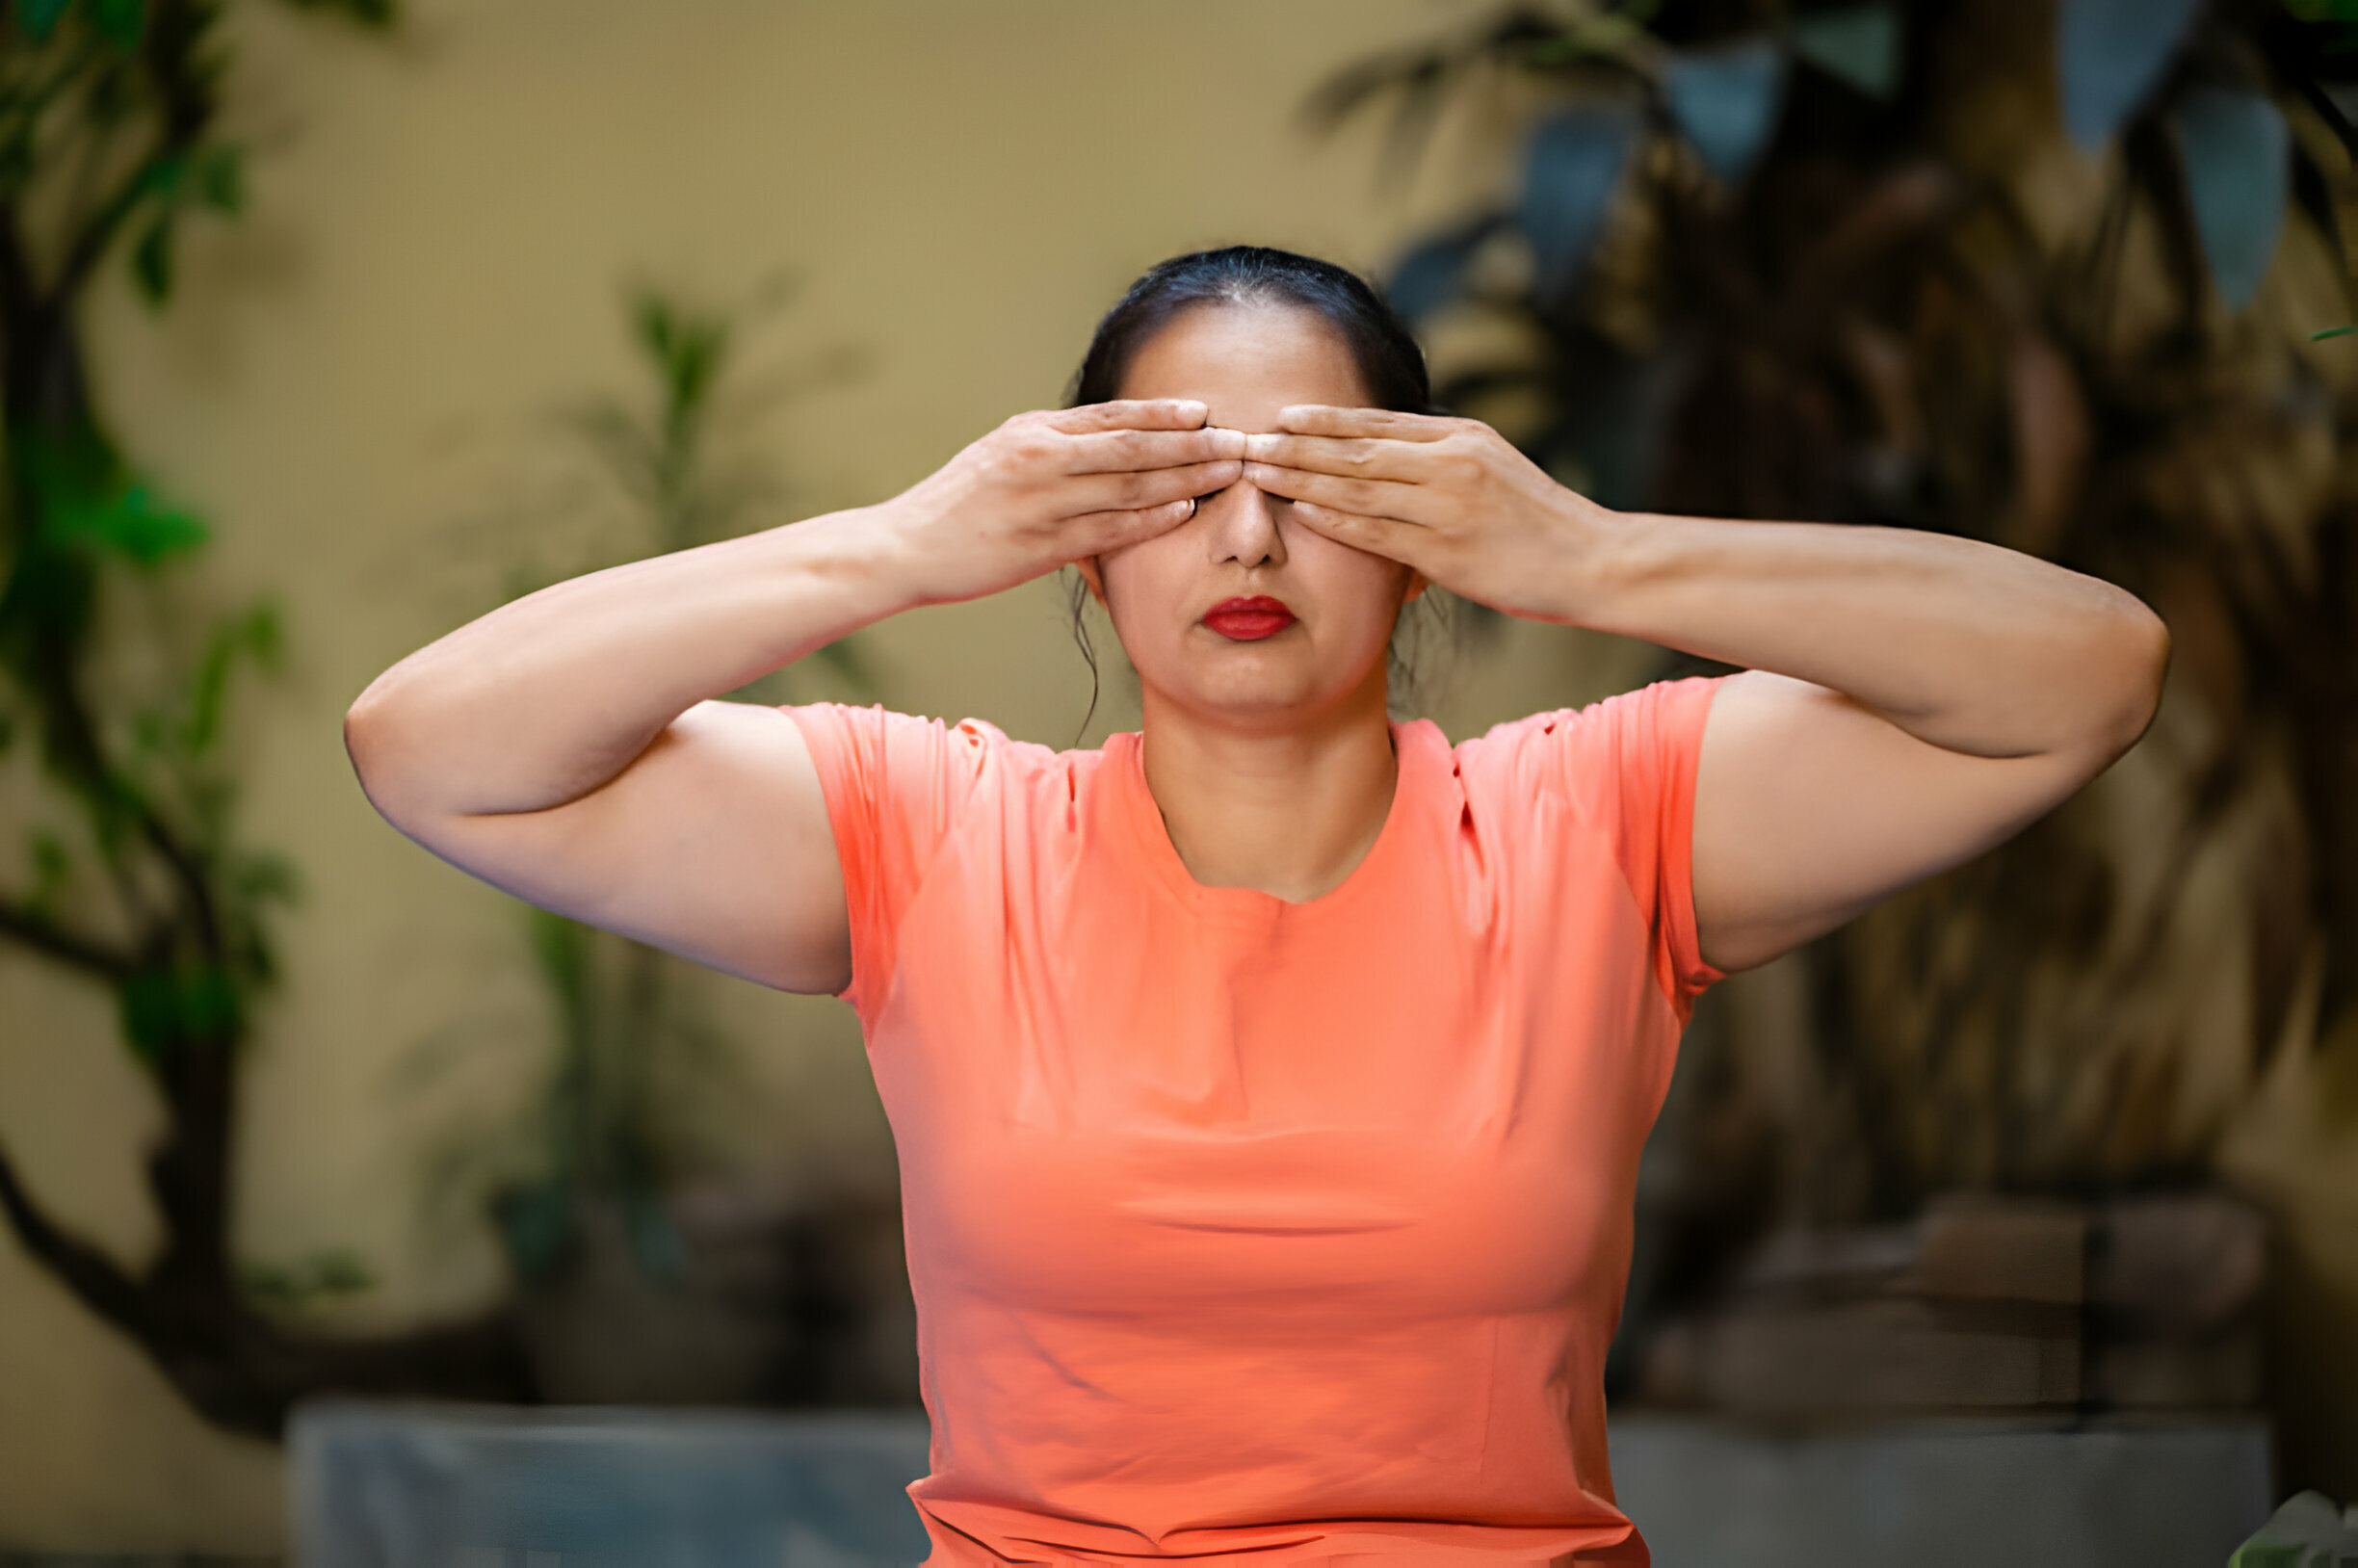 Restoring Vision with Eye Exercises After Stroke